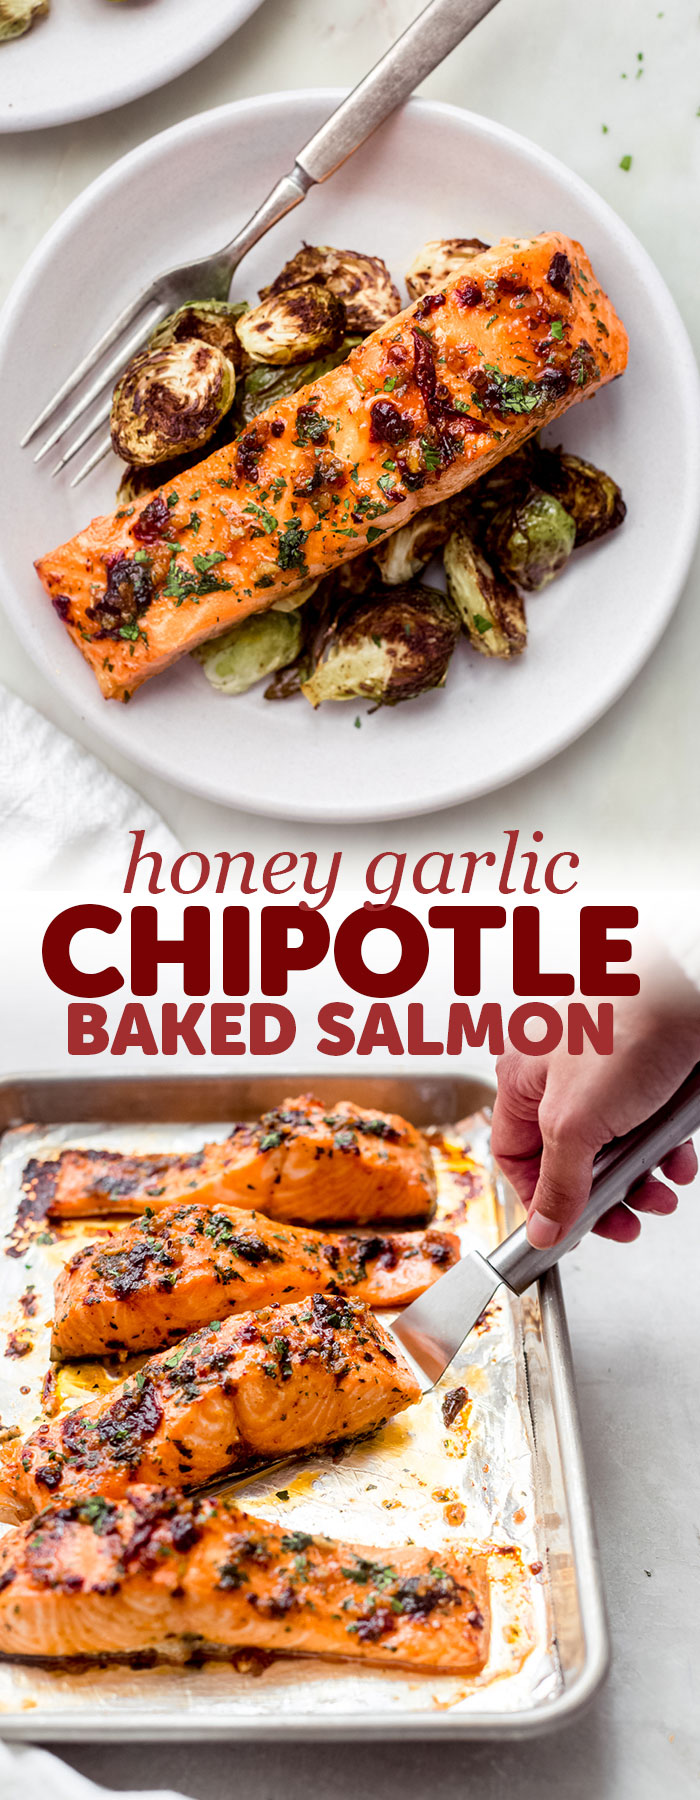 Garlic Honey Chipotle Salmon - a simple salmon recipe that takes just 5 minutes of prep work! Bake the salmon and serve with just about any side! #lowcarbrecipes #salmonrecipes #mealpreprecipes #mealprep #salmon #bakedsalmon #bakedsalmoninfoil | Littlespicejar.com